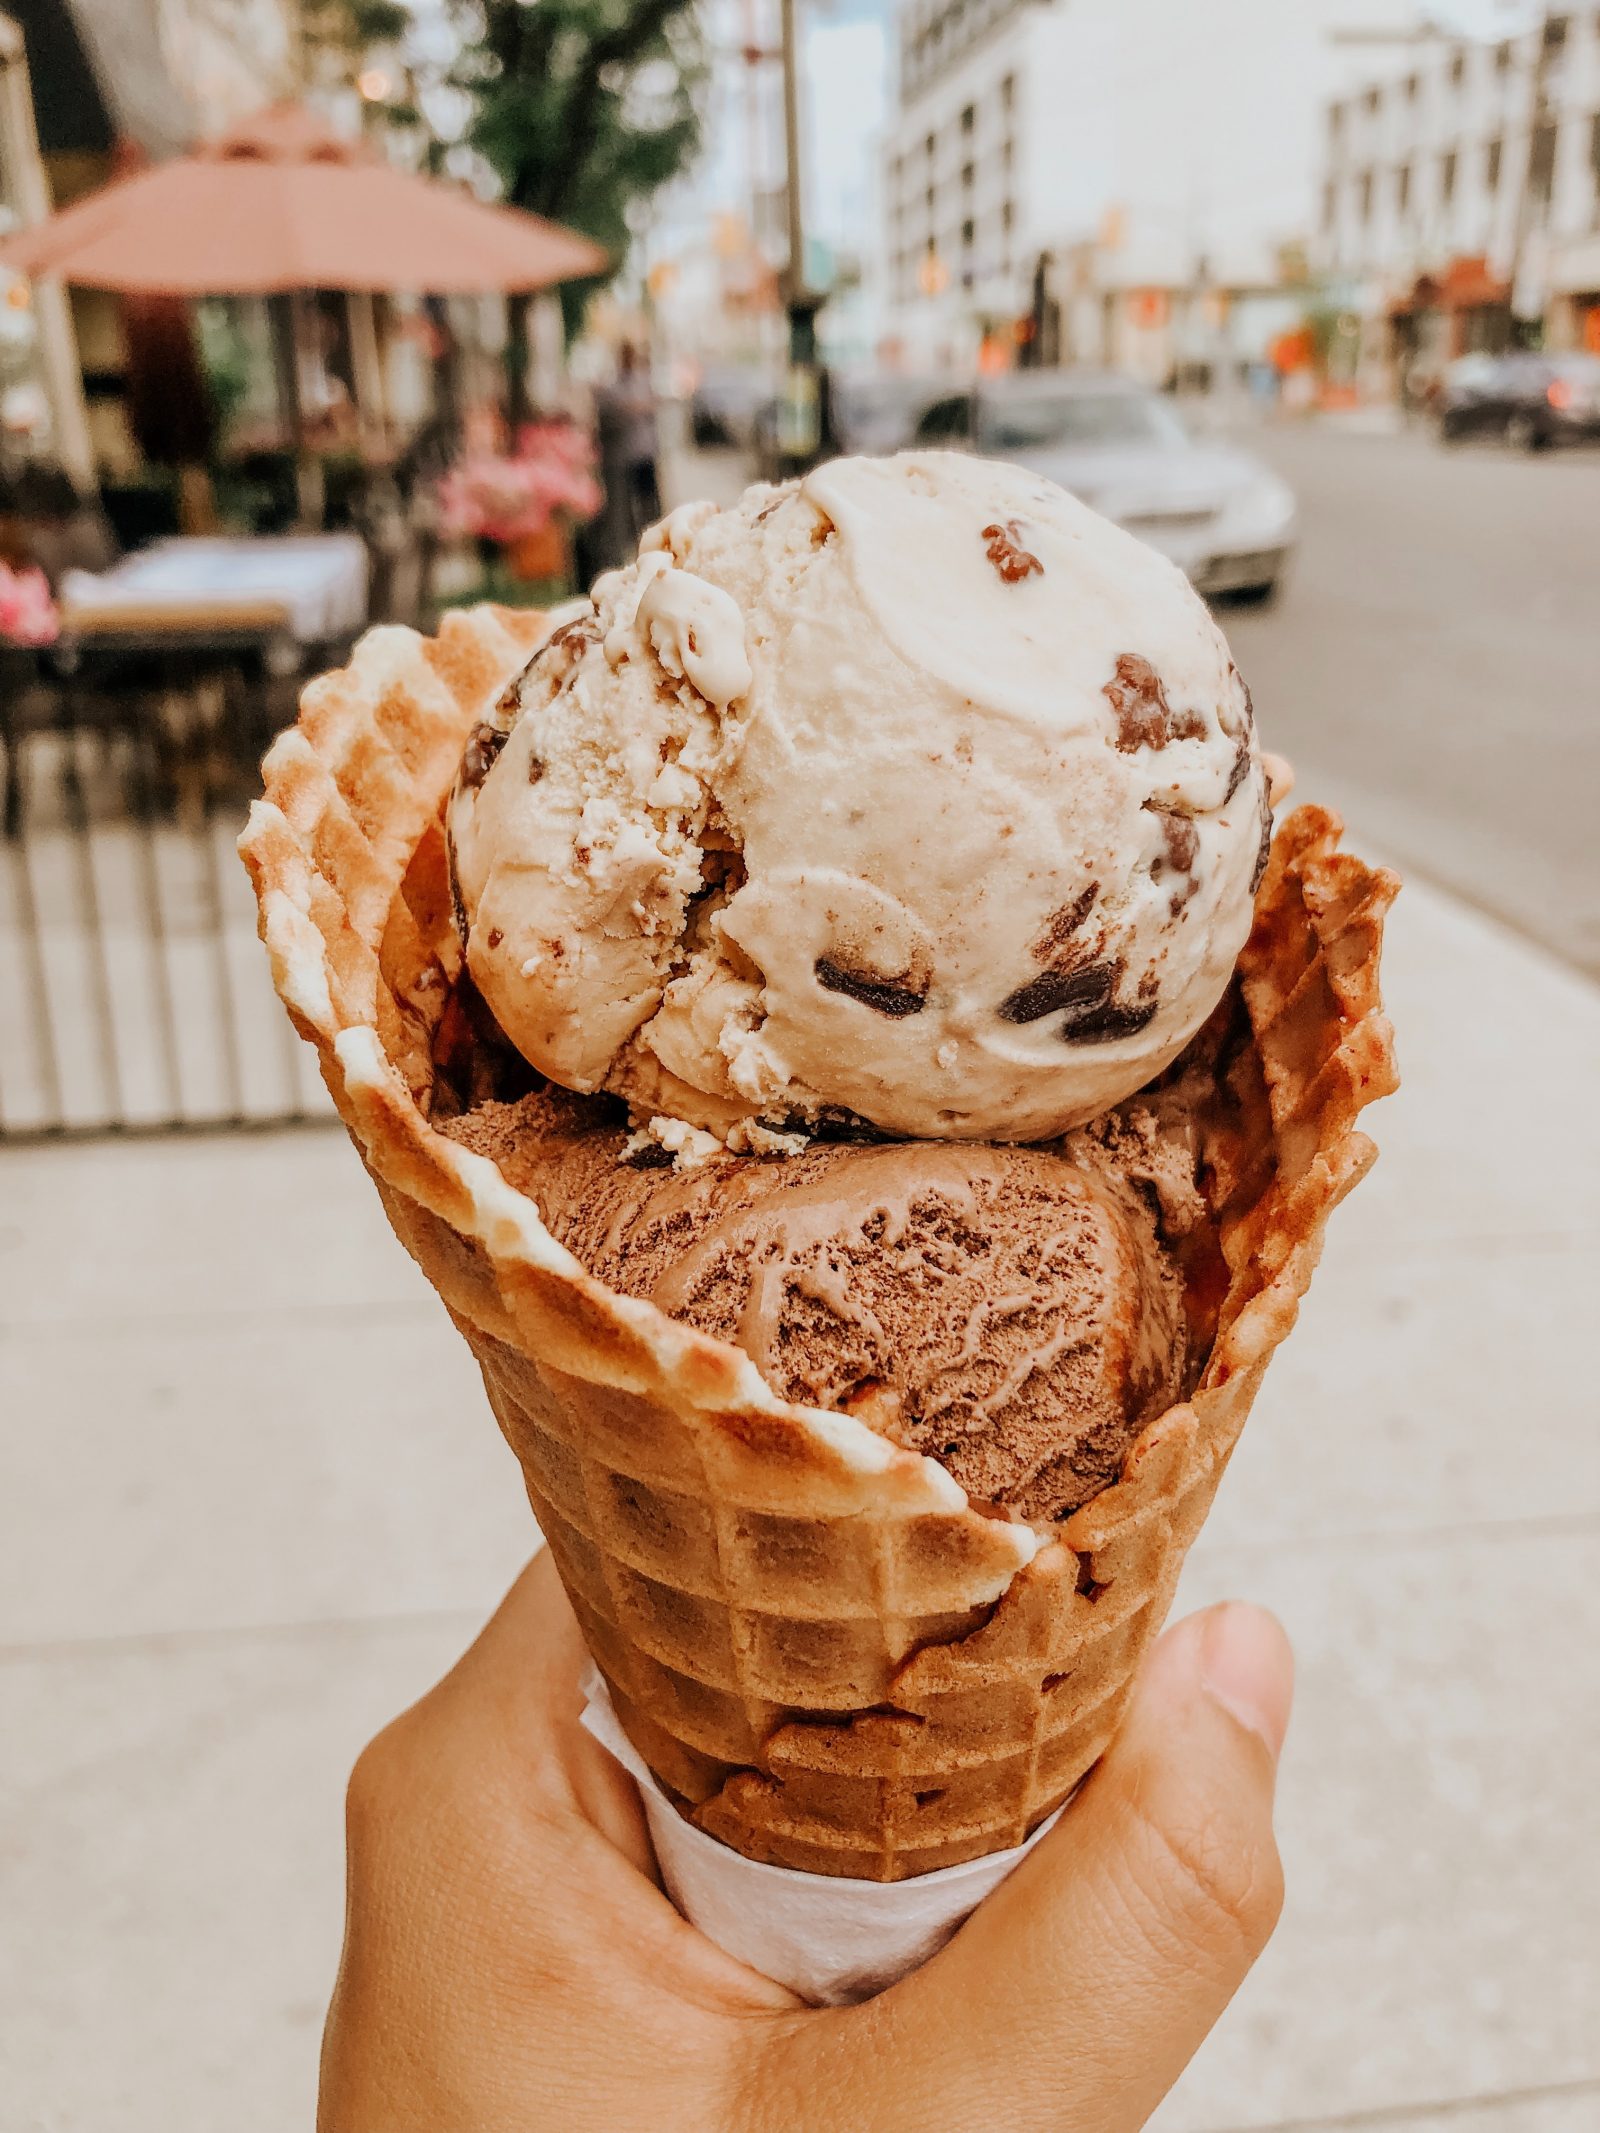 3 Delicious Ice Cream Options for a Hot Summer Day